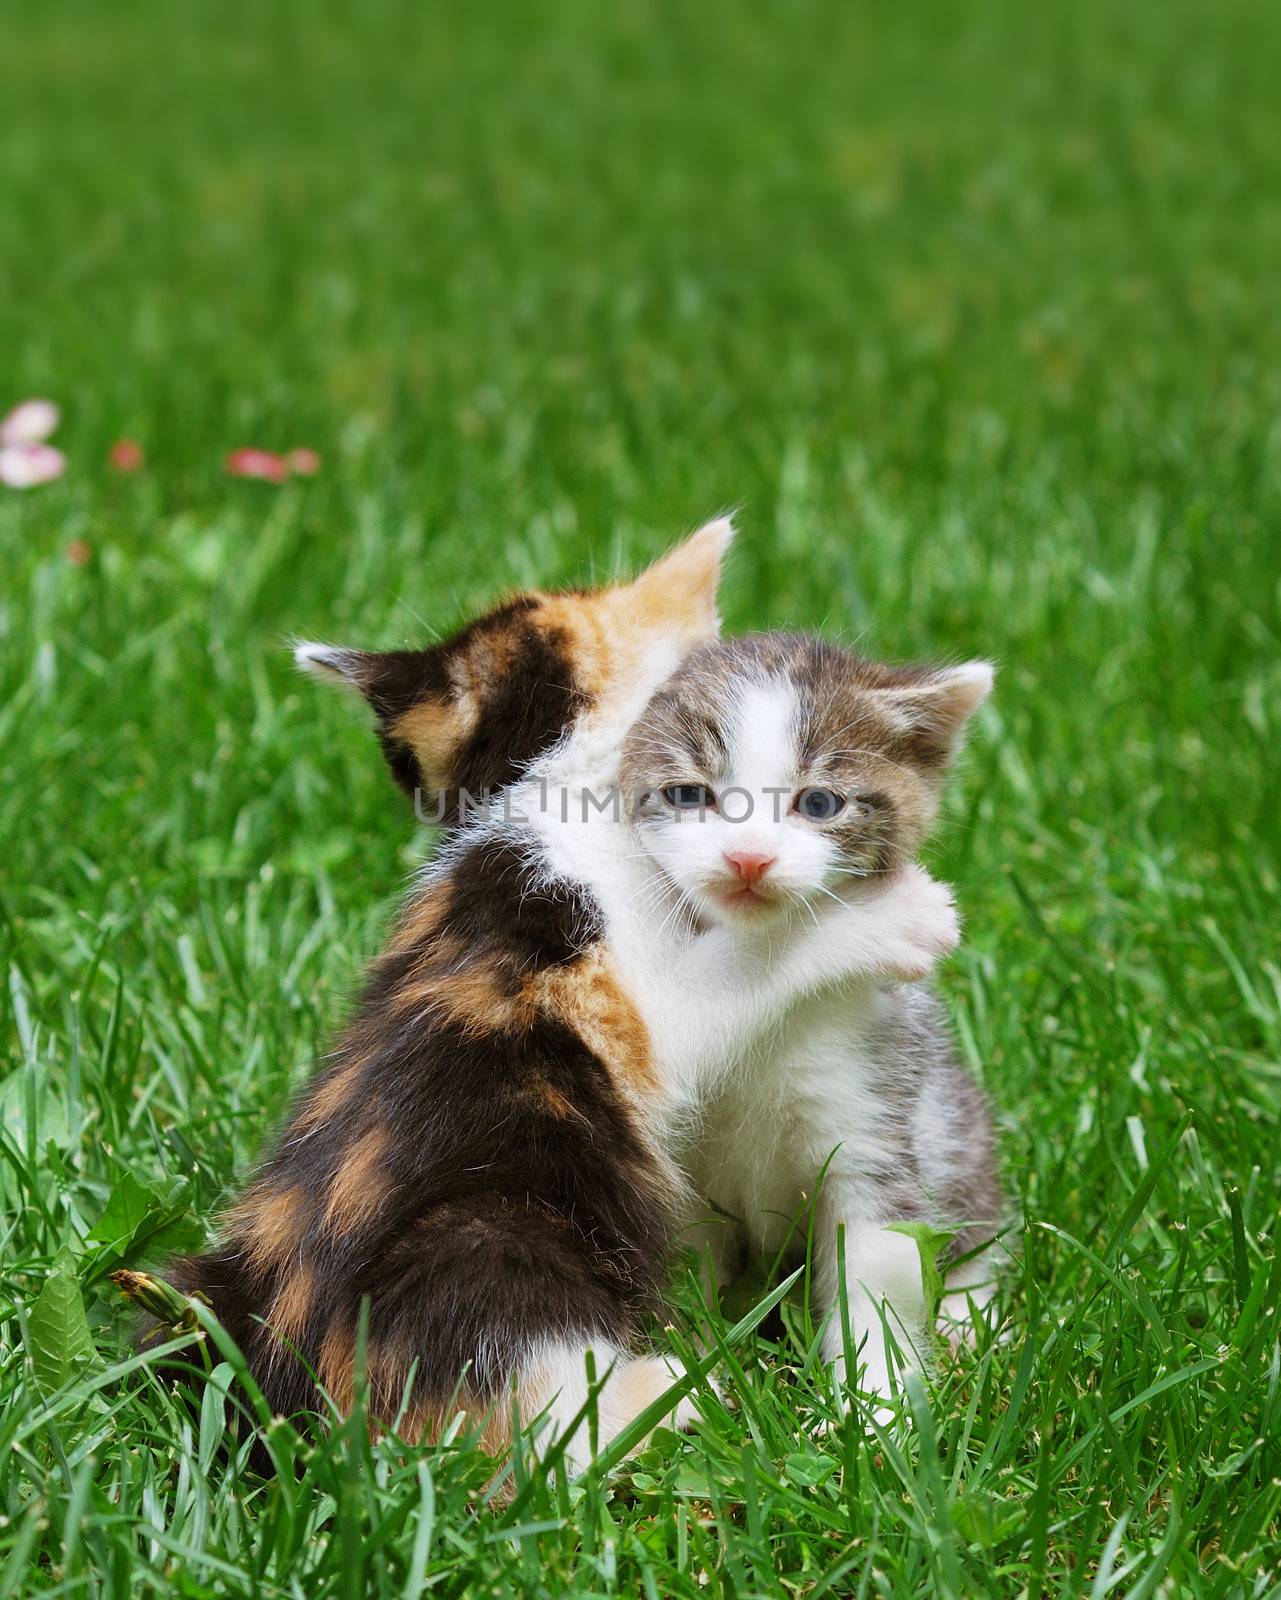 Kittens playing in the grass catch in hug like pose.